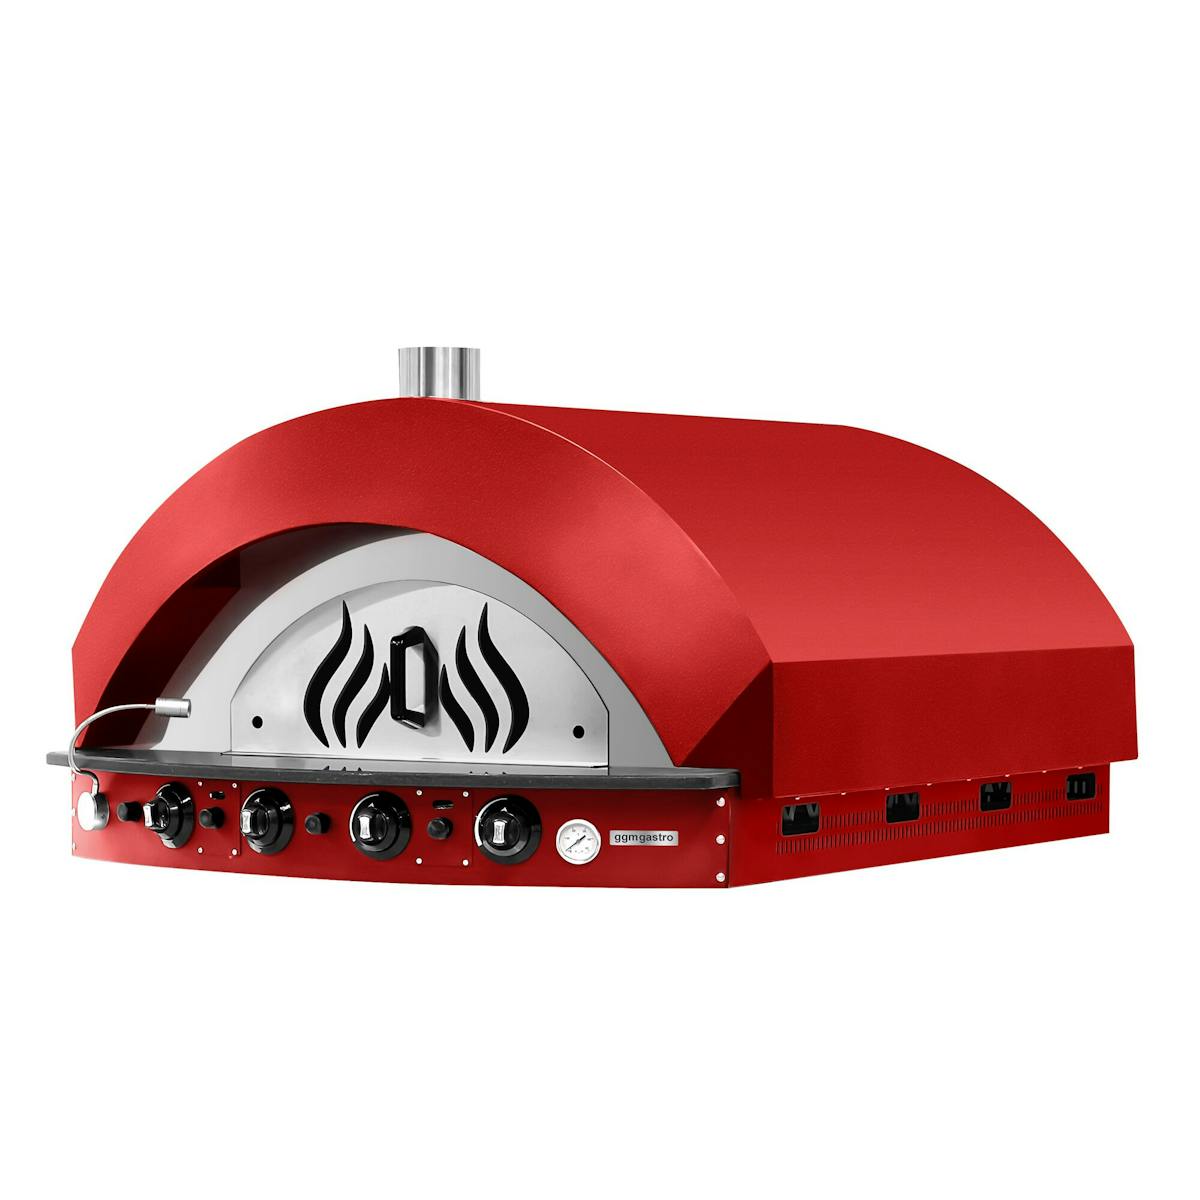 Gas pizza oven - Red - 11x 25cm - Manual